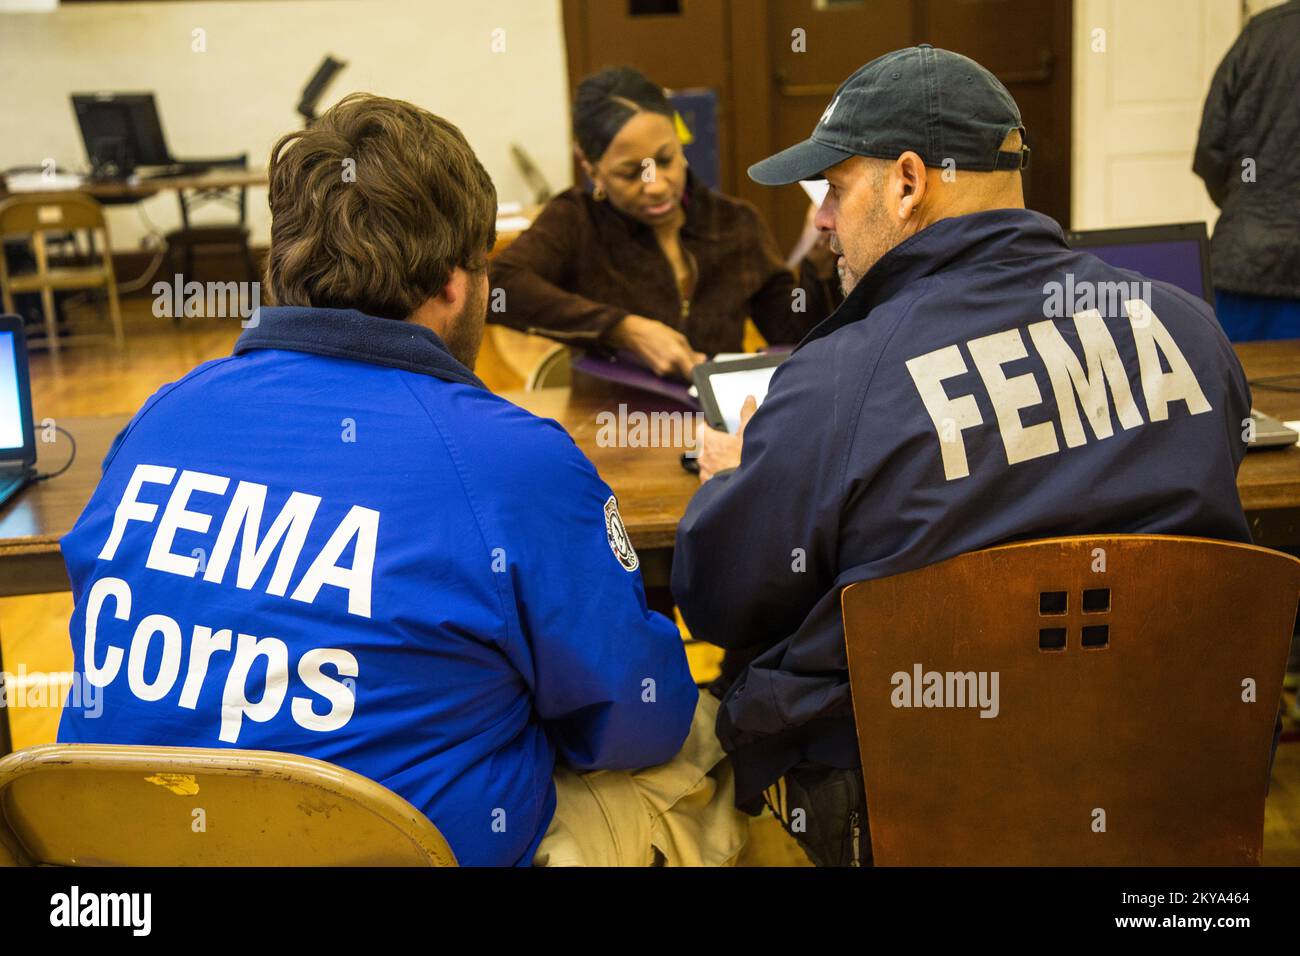 Highland Park, MI, October 4, 2014 - Forrest Evans (left), FEMA Corps Spruce 2 DSA Specialist, and Javier R. Ortiz-Quiles (right), FEMA Disaster Assistance Specialist, assist disaster survivor Jolita Cotton (center) at a Recovery Support Site (RSS) in the gymnasium of the Detroit Rescue Mission Community Center in Highland Park, Michigan after the Detroit metropolitan counties of Oakland, Wayne and Macomb were adversely impacted by severe storms and flooding on August 11-13, 2014. FEMA Supports local and state governments and tribal entities in their efforts to recover from natural disasters. Stock Photo